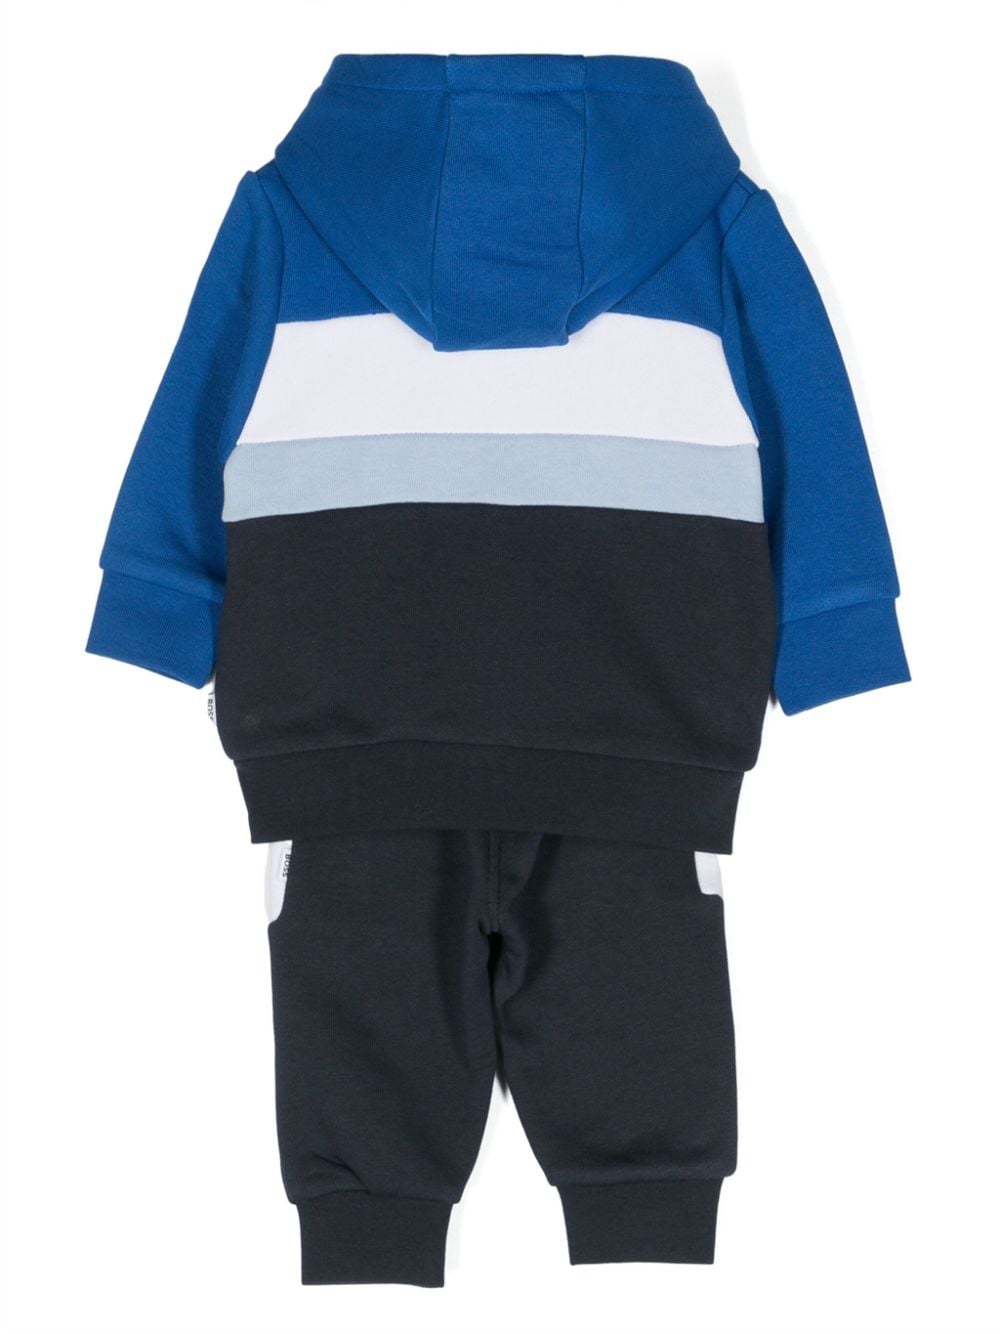 Blue sports outfit for newborns with logo